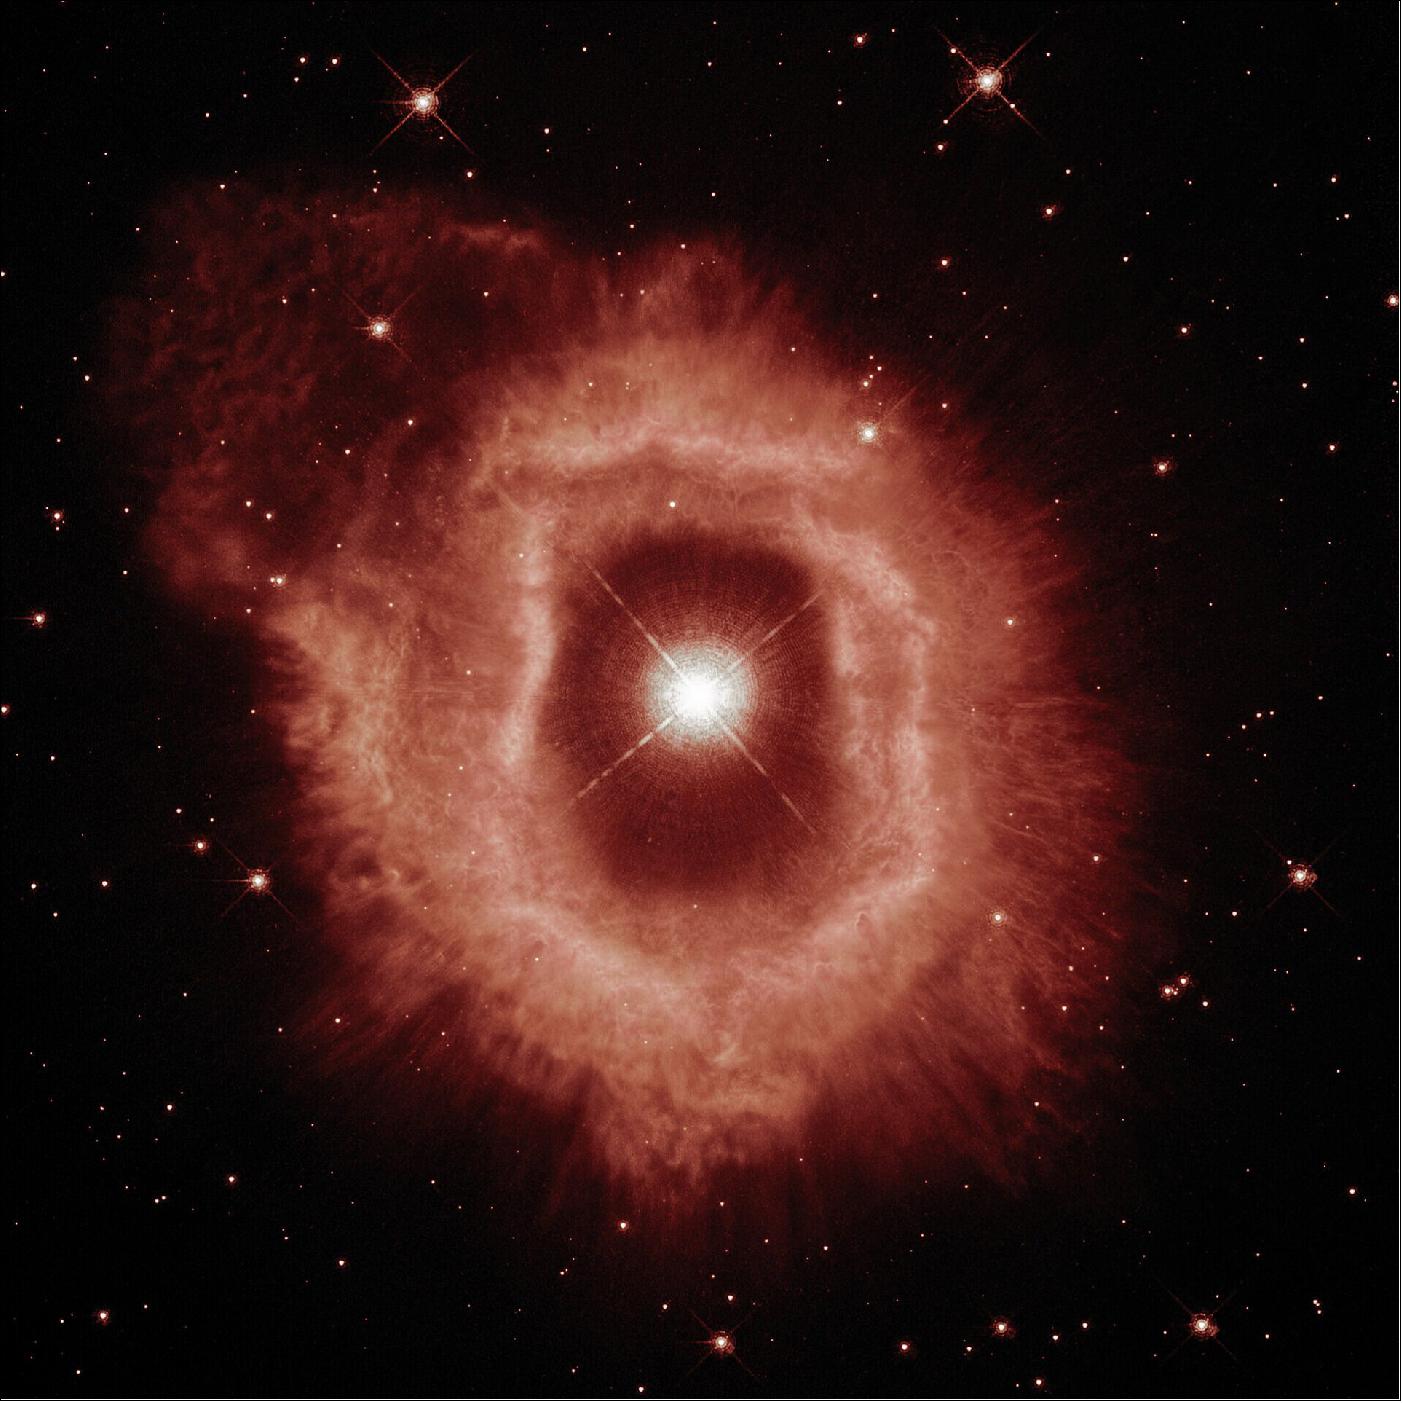 Figure 48: This first image of AG Carinae showcases the details of the ionized hydrogen and ionized nitrogen emissions from the nebula (seen here in red), image credit: ESA/Hubble and NASA, A. Nota, C. Britt; CC BY 4.0